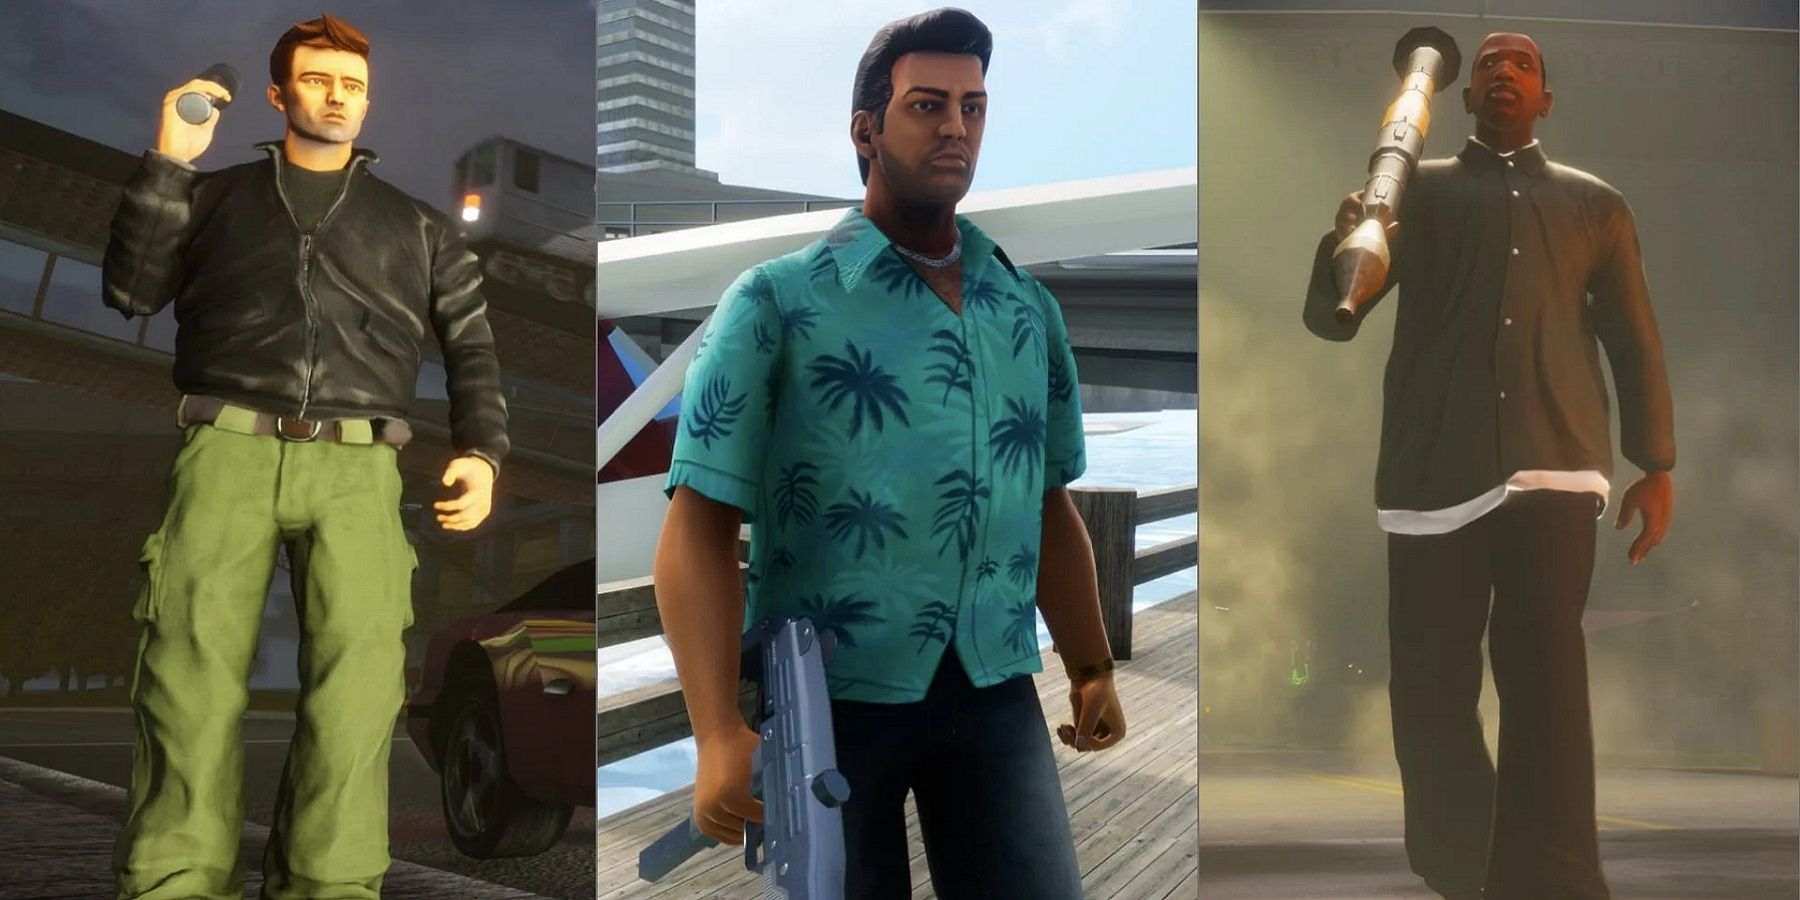 Image from the GTA trilogy showing the three protagonists from each game.